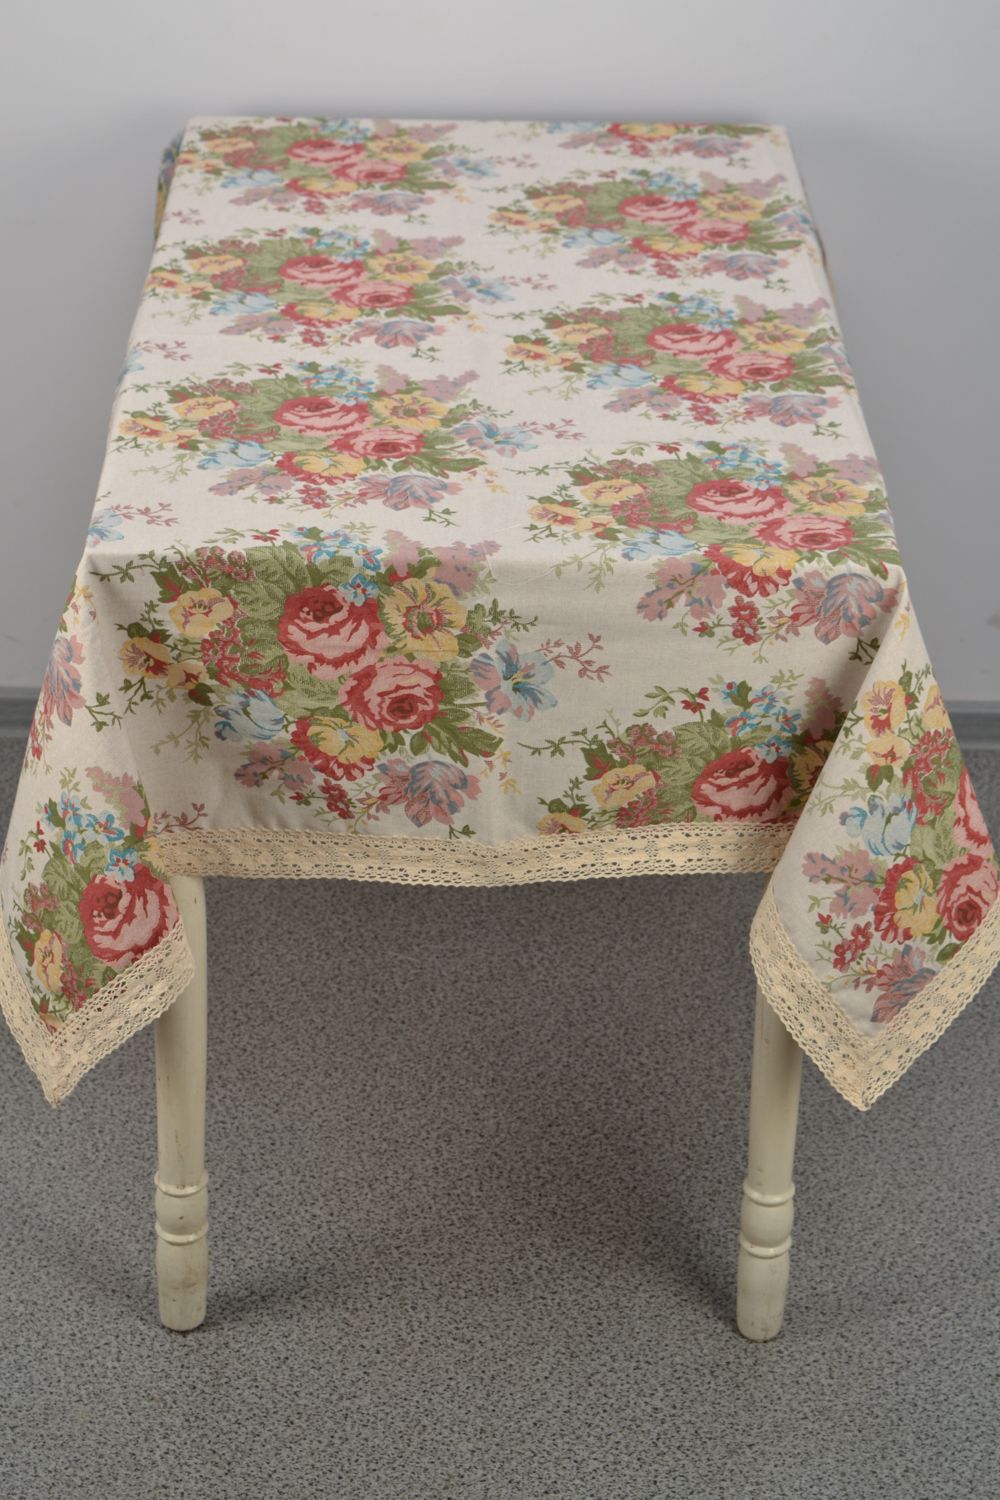 Handmade tablecloth made of cotton and polyamide with floral print and lace photo 3